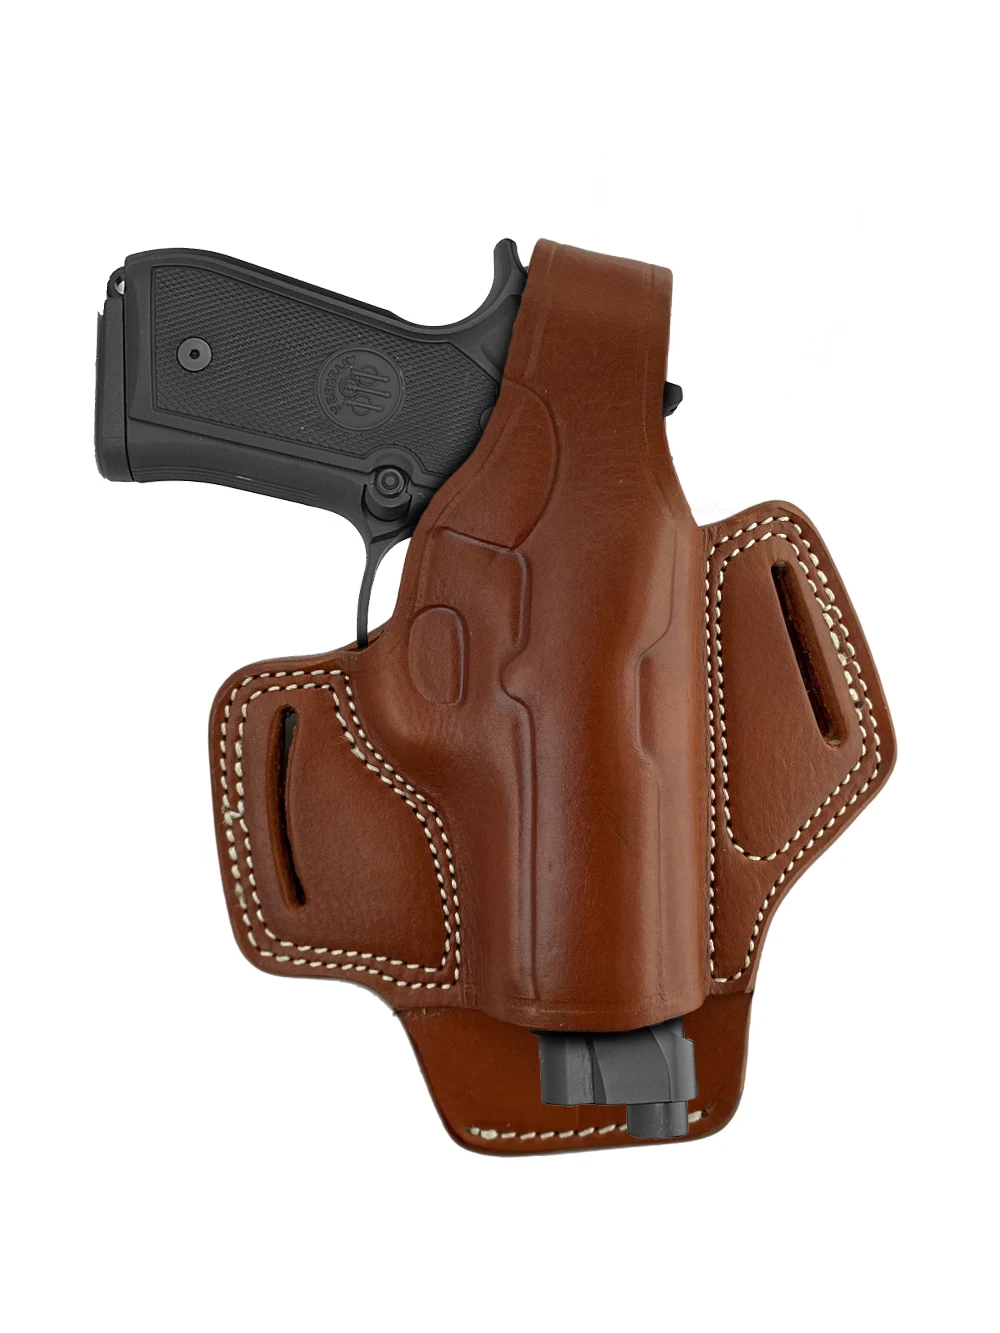 

Premium Gunleather Holster For Beretta PX4 Protected Barrel Owb Carry Two Slot Thumb Break Handmade Pistol Pouch Firearm Cover